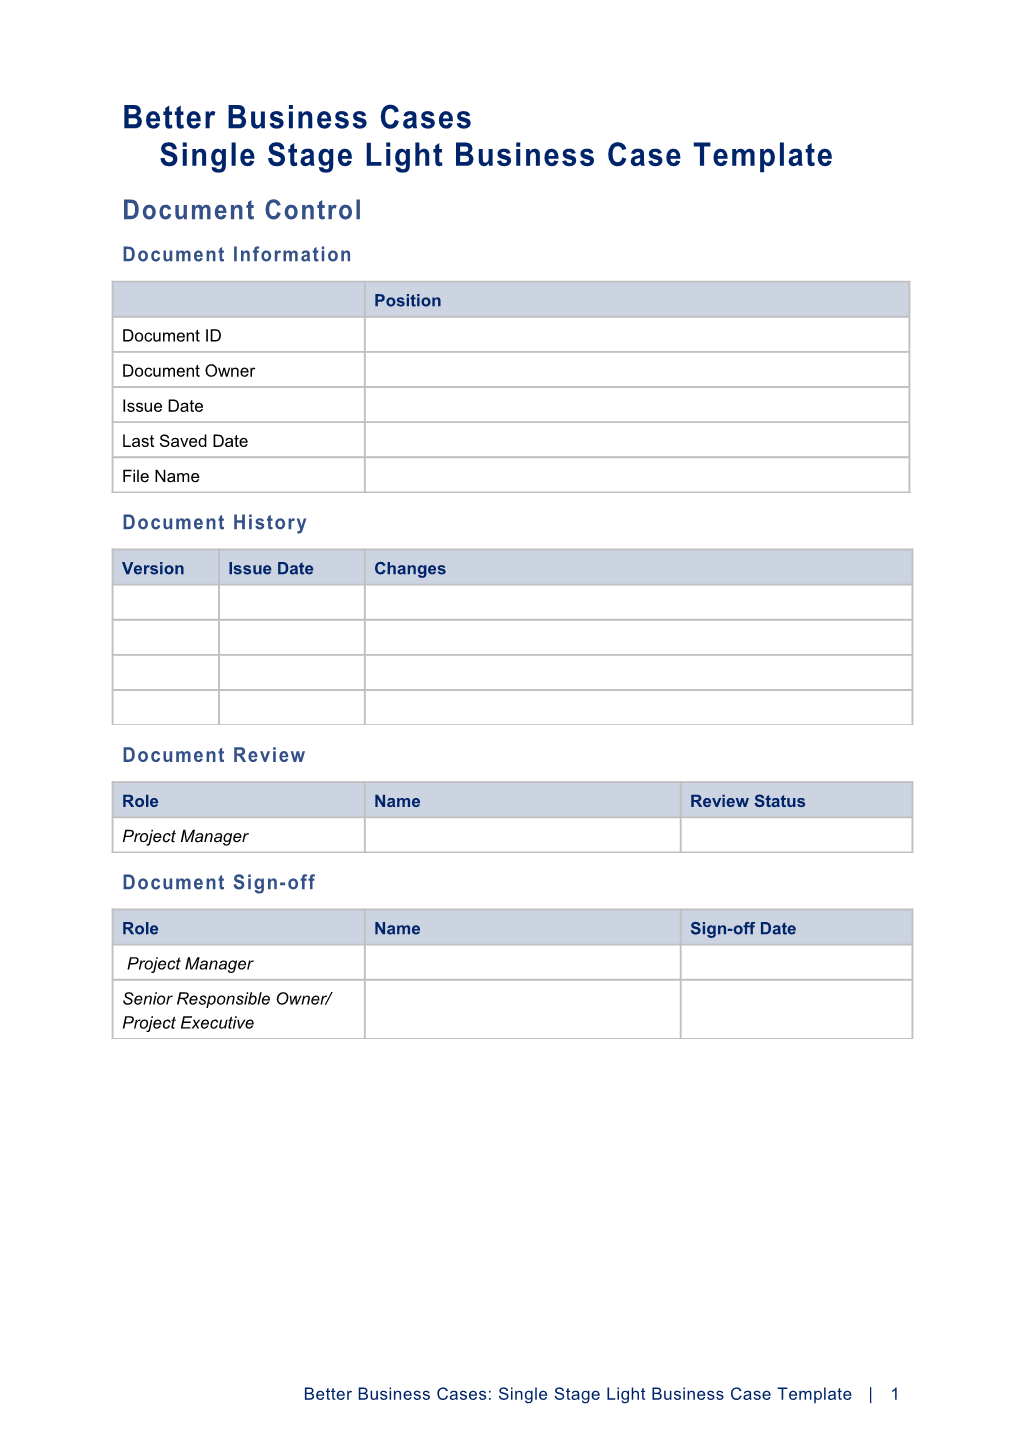 Better Business Cases: Indicative Business Case Template